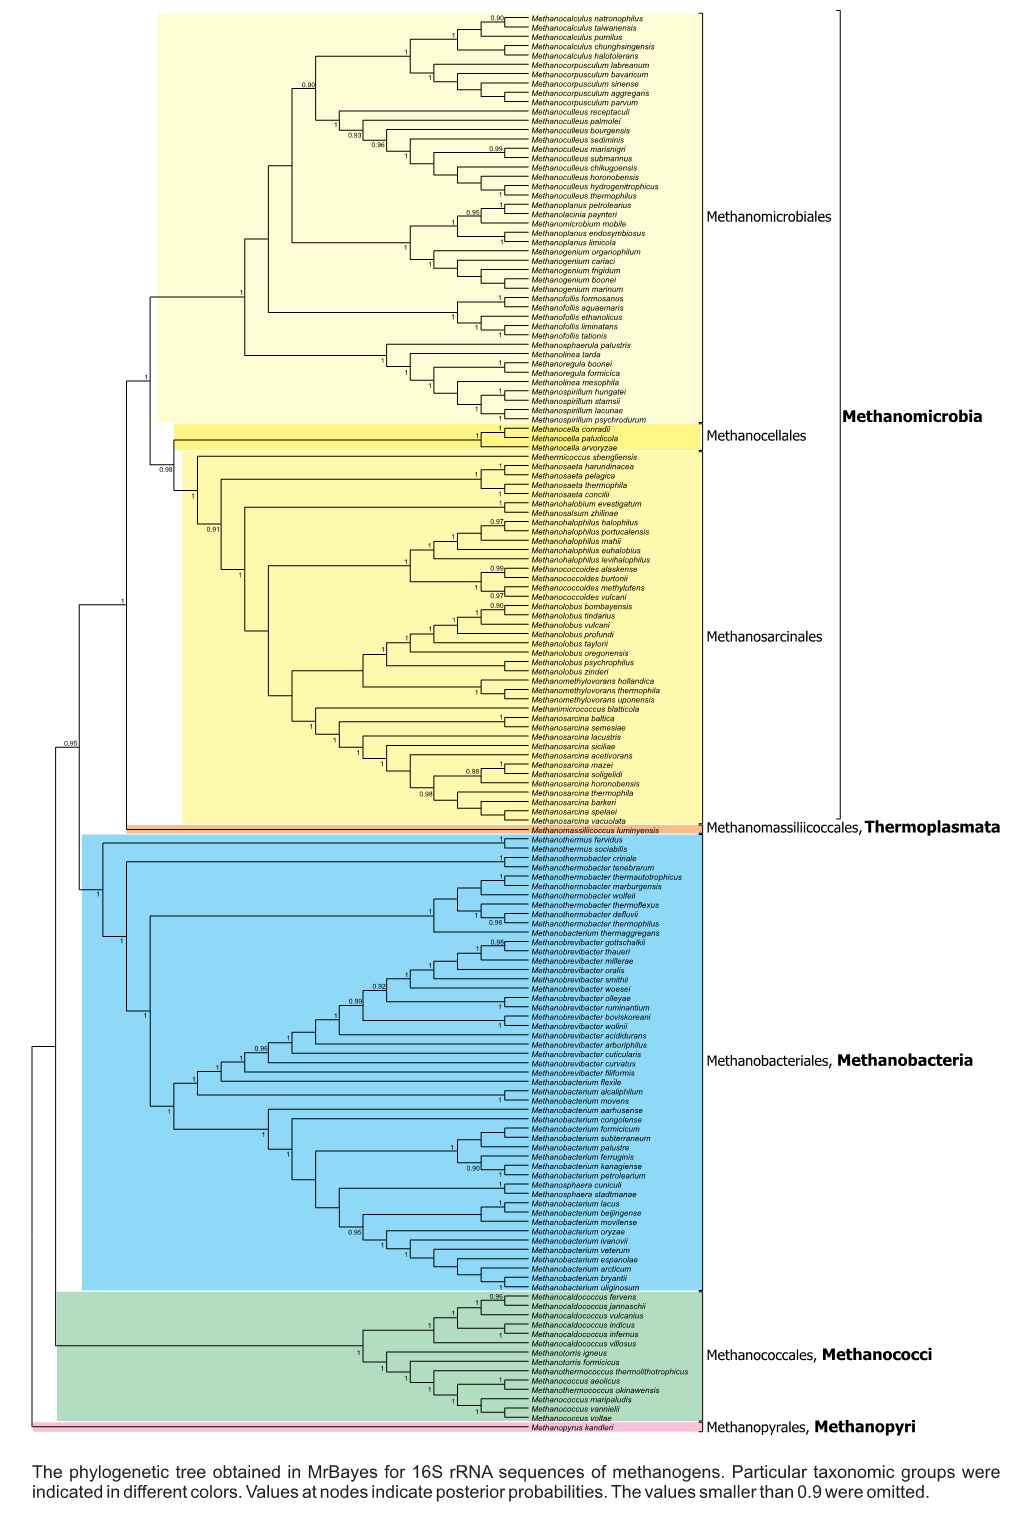 Display Taxonomy in the Phylogenetic Tree